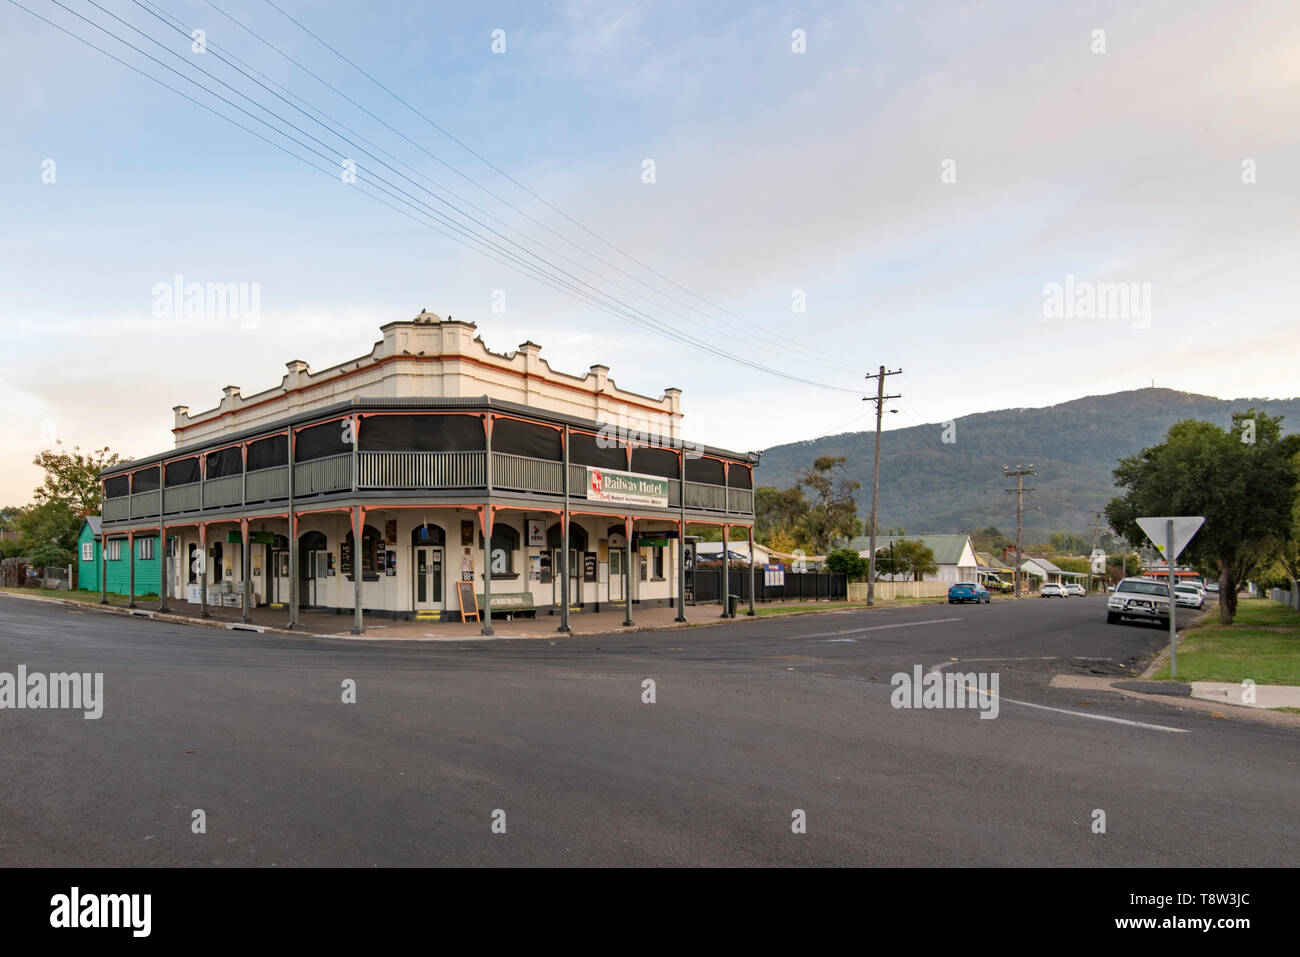 The 1880's constructed, heritage listed, Railway Hotel in the town of Murrurundi in the Upper Hunter Valley, New South Wales, Australia Stock Photo